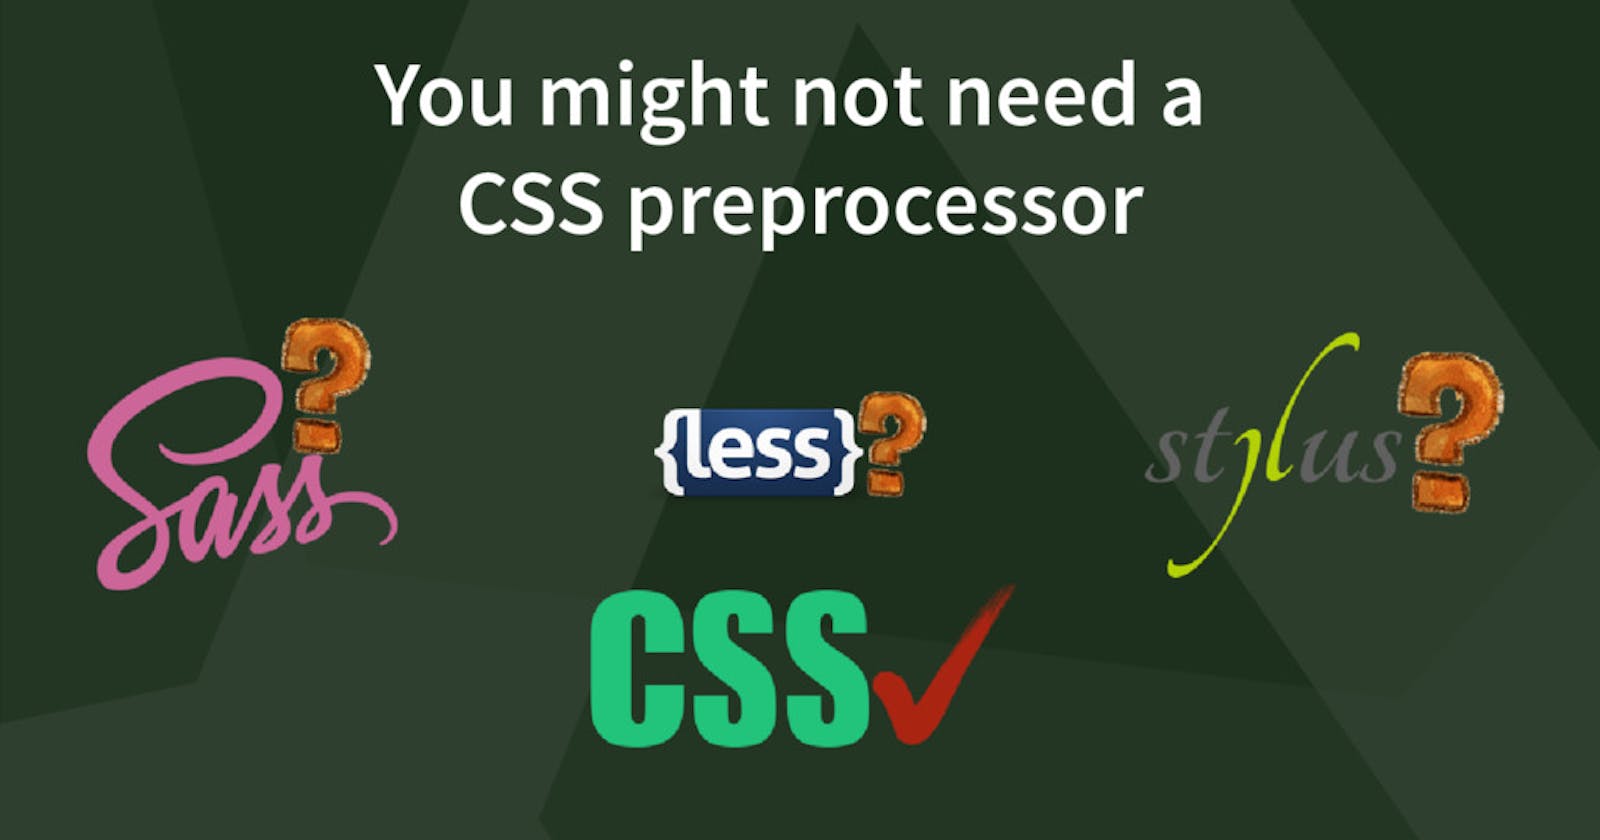 You might not need a CSS preprocessor